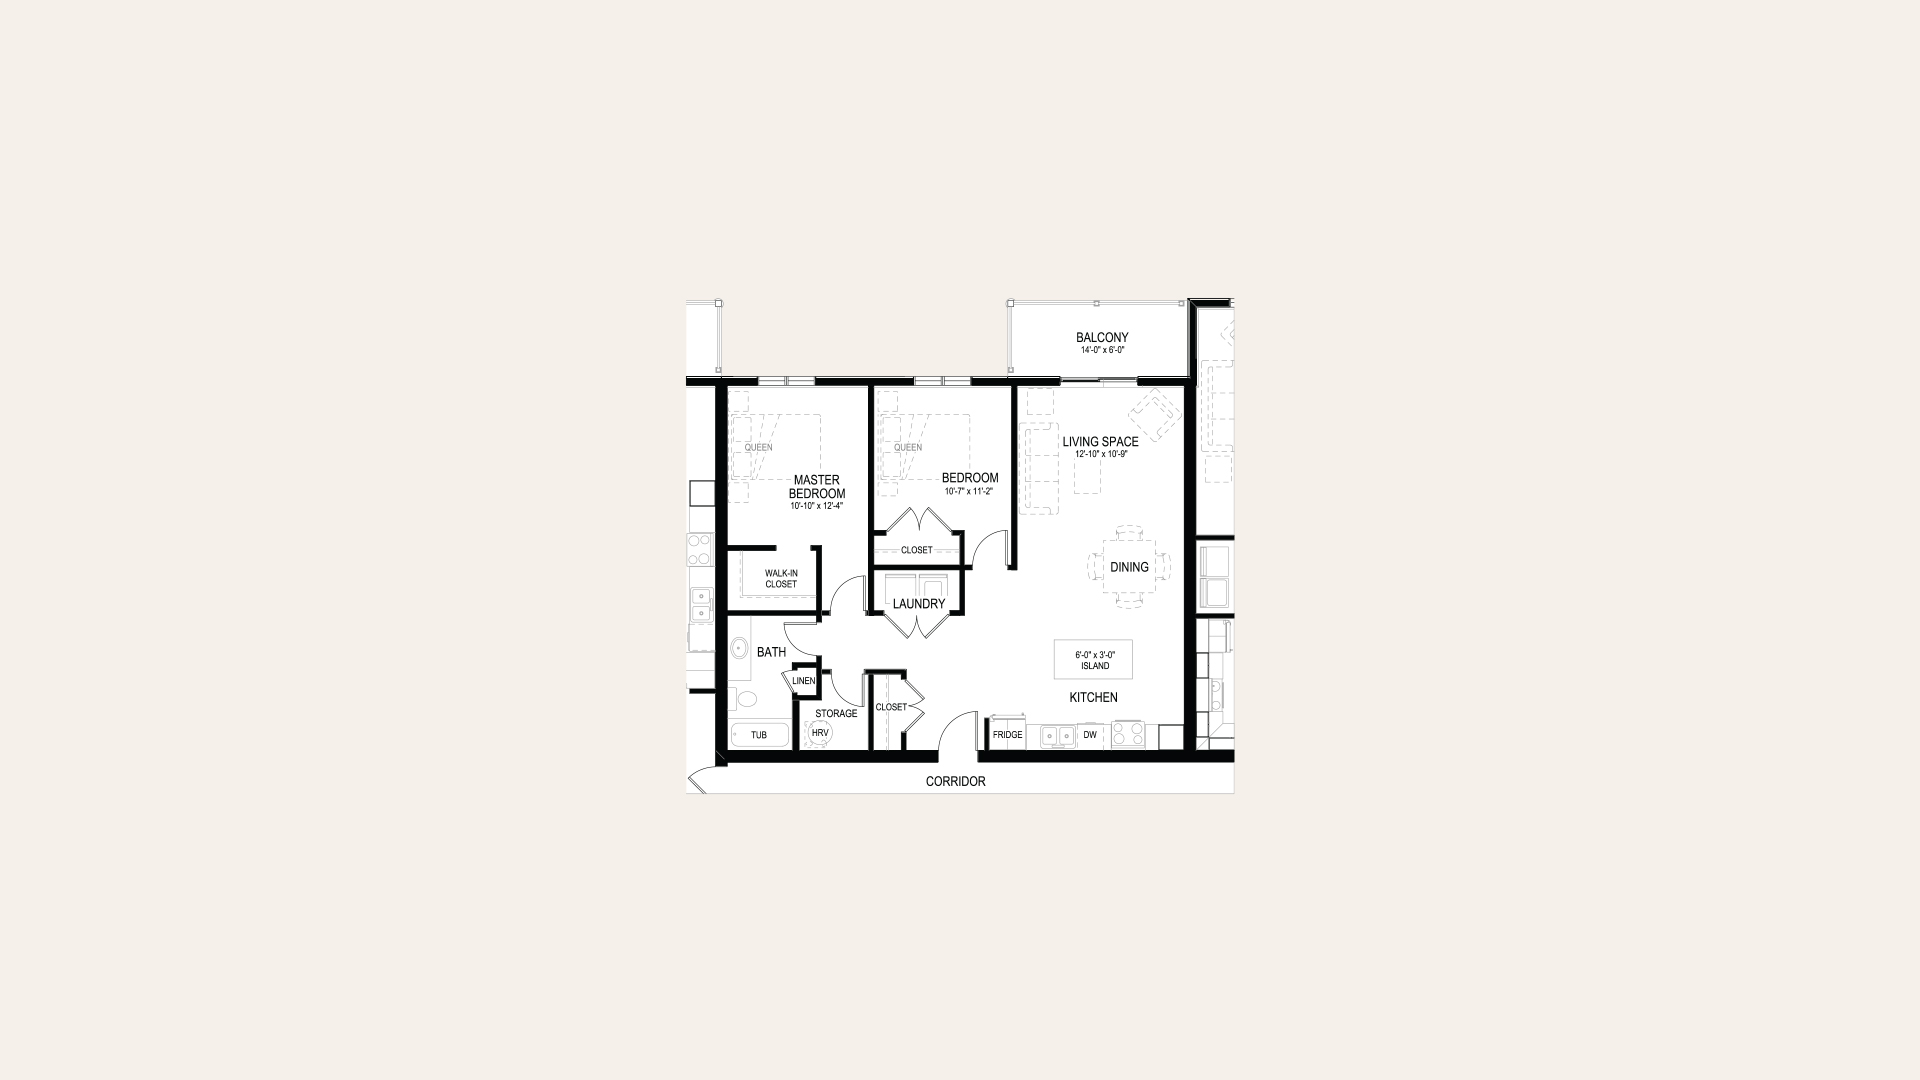 Floor plan of apartment C in Building A. One master bedroom with a walk-in closet, One bedroom, one bathroom, laundry closet, storage room, balcony, and an open concept kitchen and living room.